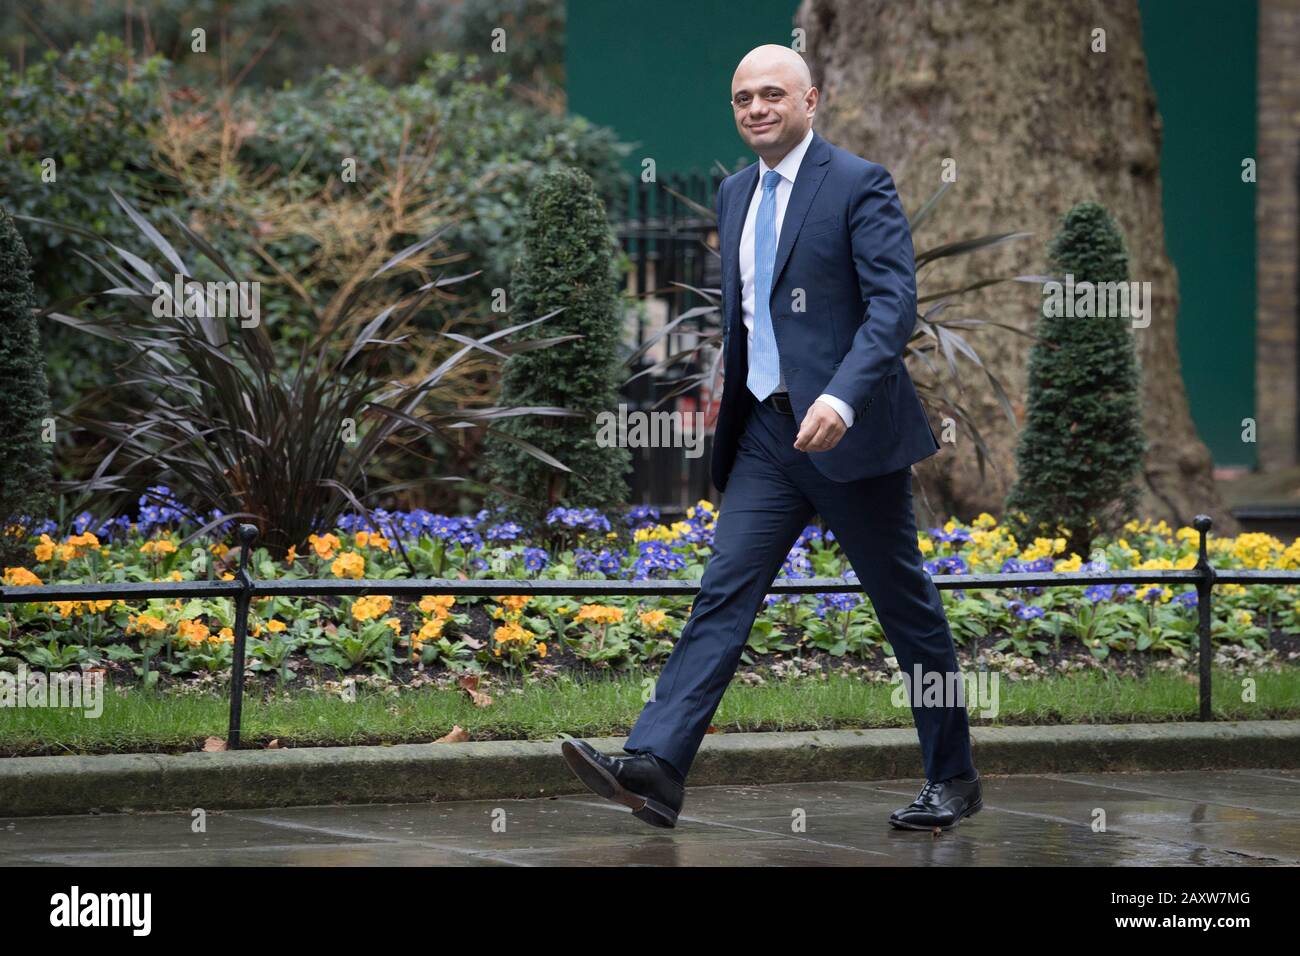 Sajid Javid arriving in Downing Street, London, he has dramatically quit as chancellor after Boris Johnson ordered him to fire his closest aides. Stock Photo